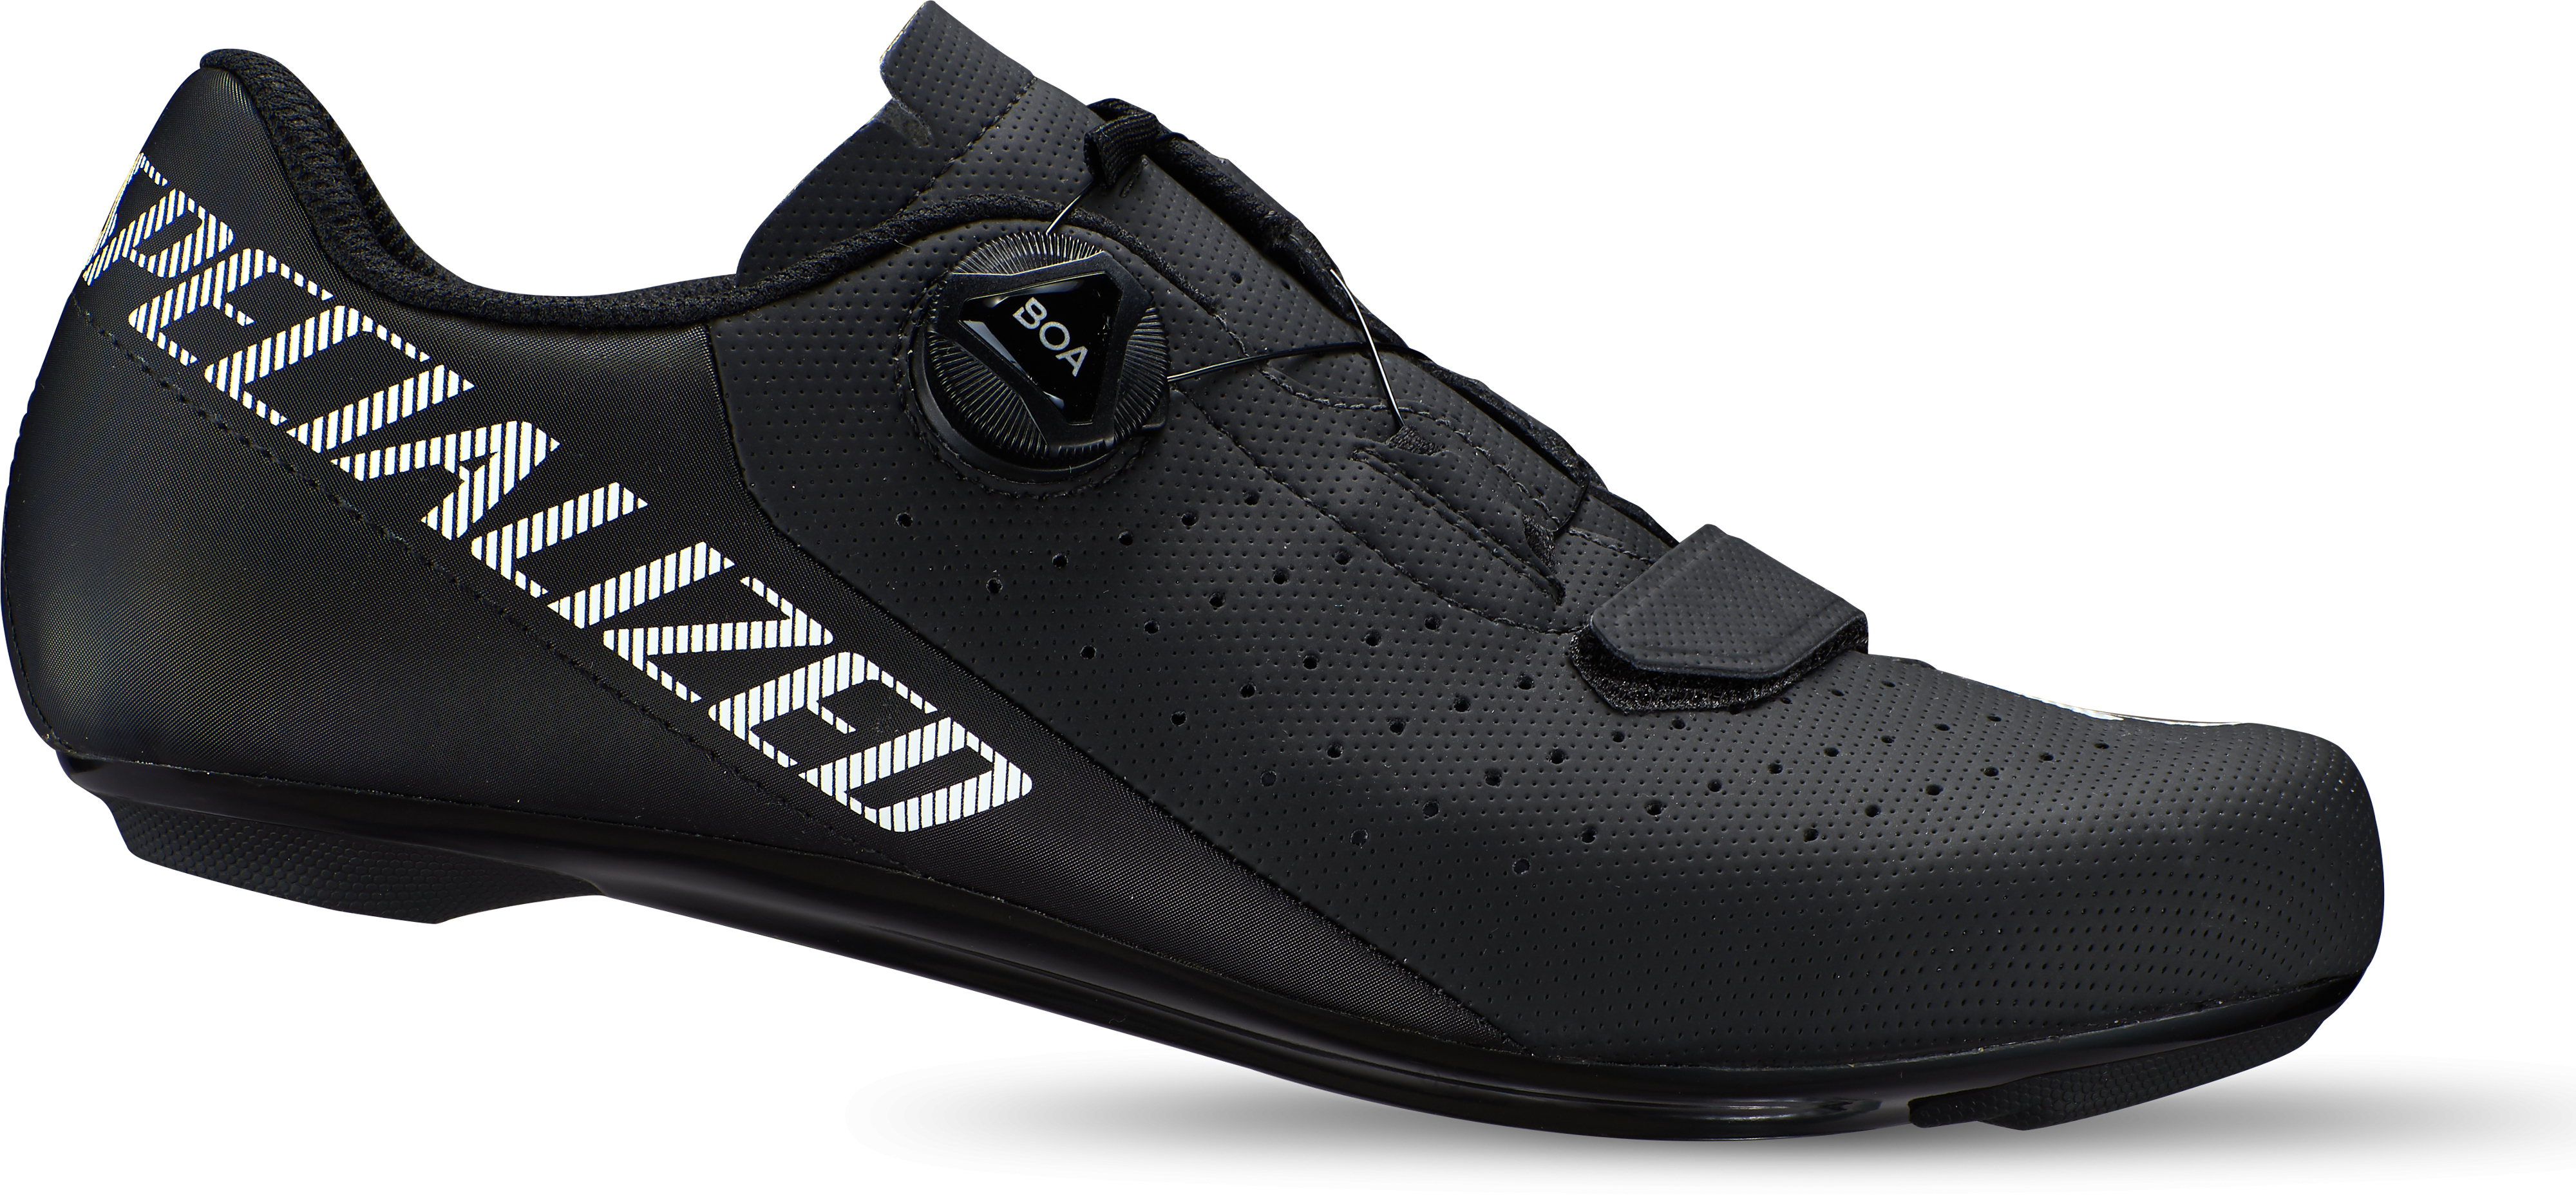 Specialized  Torch 1.0 Road Cycling Shoes  48 Black